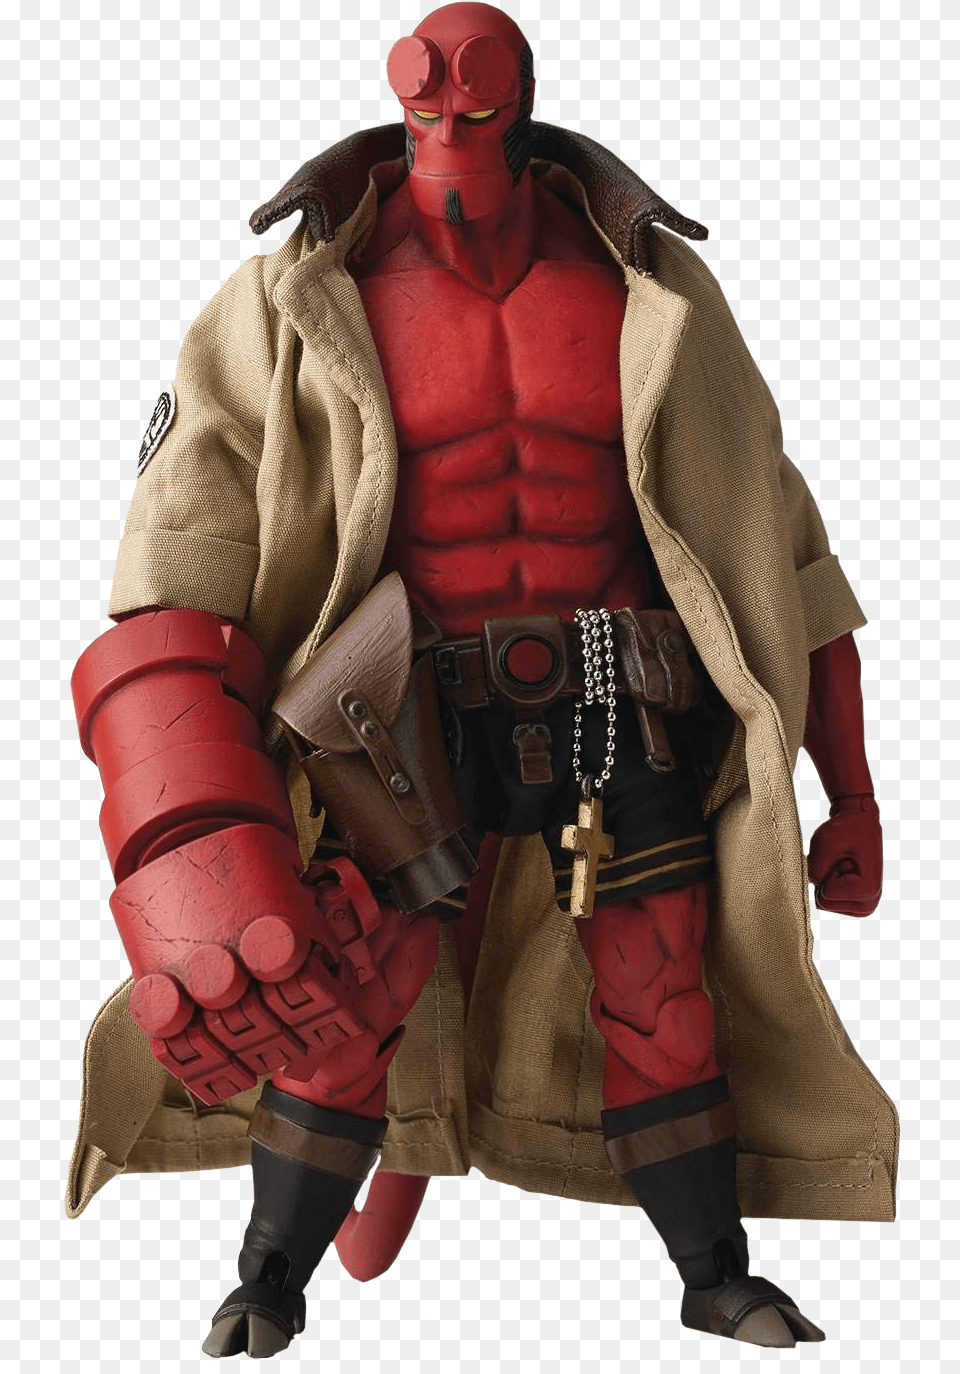 Transparent Hellboy Character With Big Arm, Clothing, Coat, Adult, Male Png Image